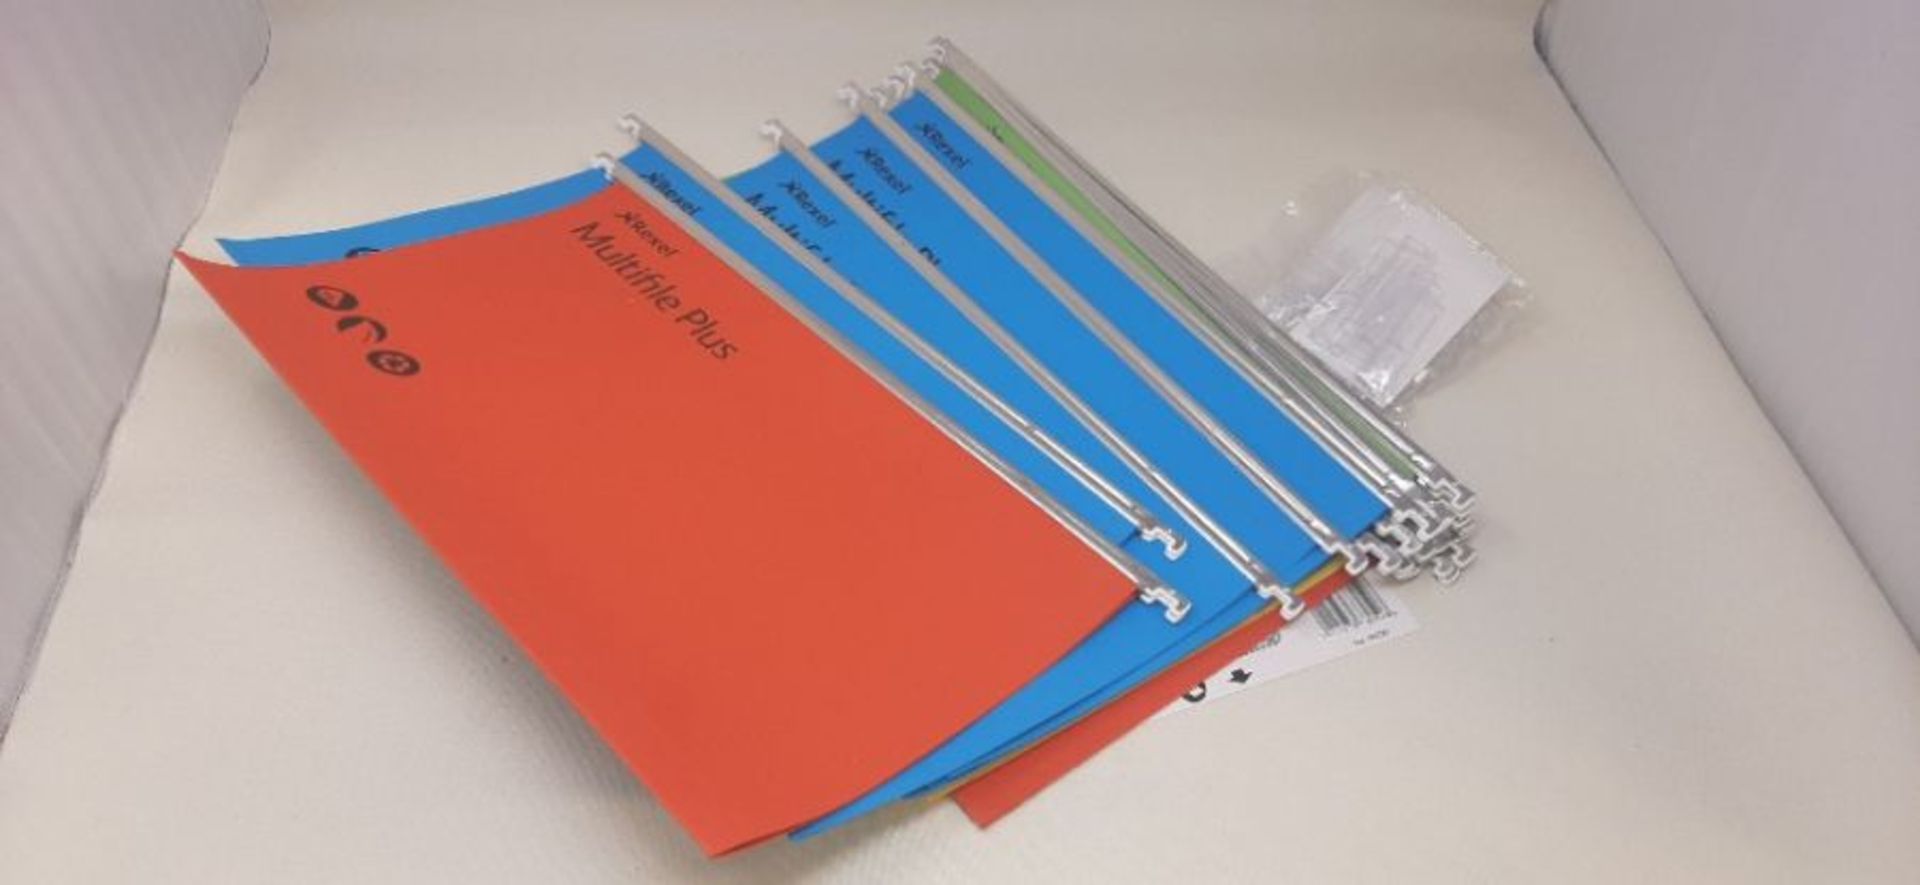 Rexel Foolscap Suspension Files with Tabs and Inserts for Filing Cabinets, 15 mm V-bas - Image 2 of 2